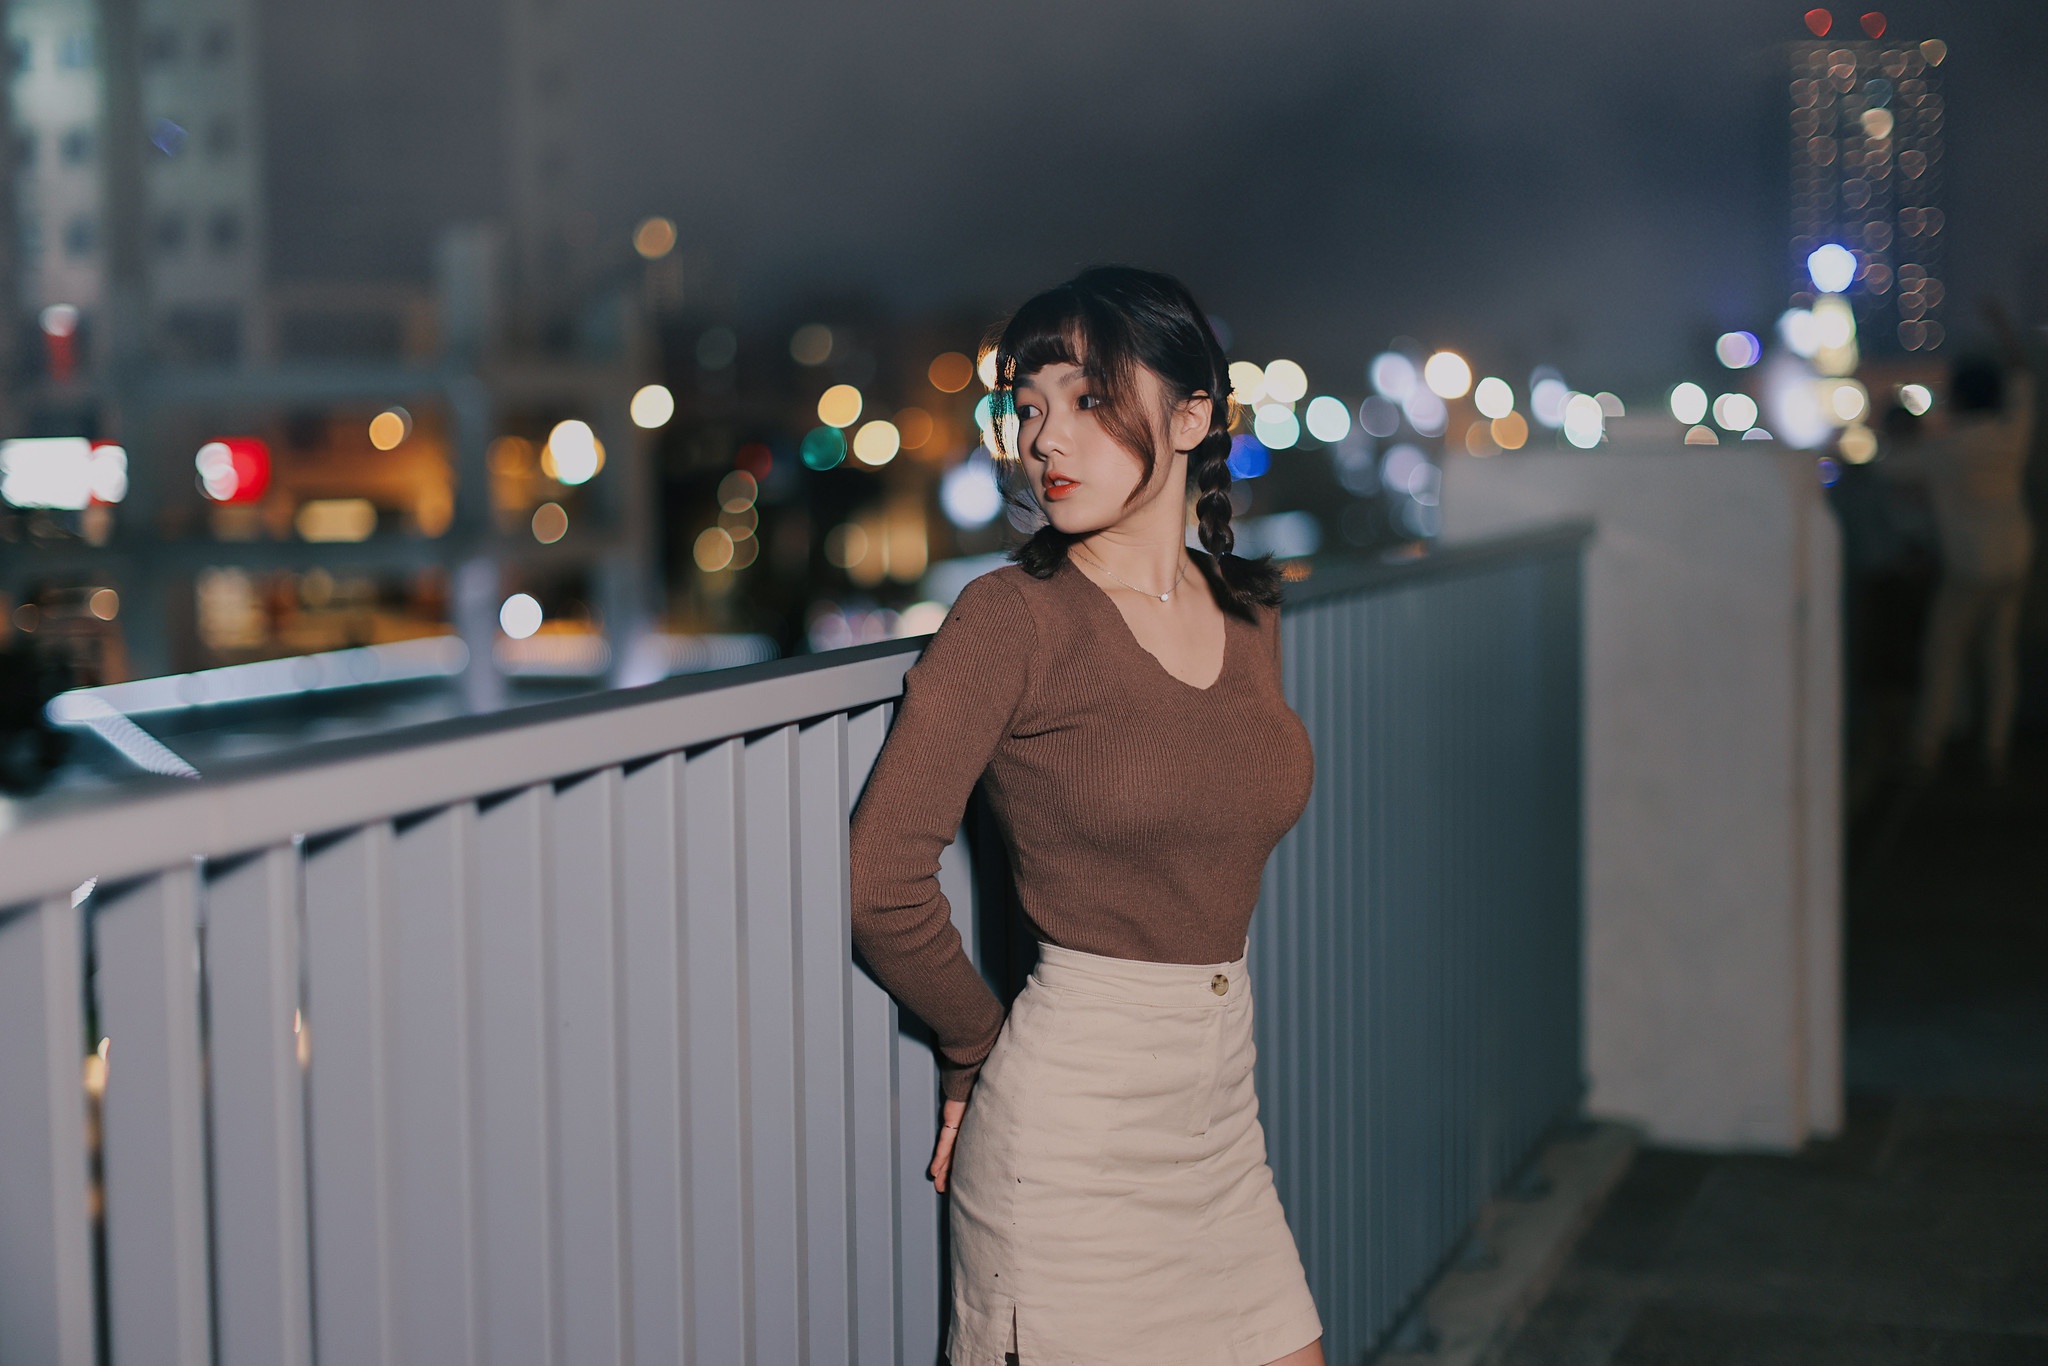 People 2048x1366 Asian model women long hair brunette grey skirt leaning railing twintails night sky depth of field city lights looking into the distance brown sweater